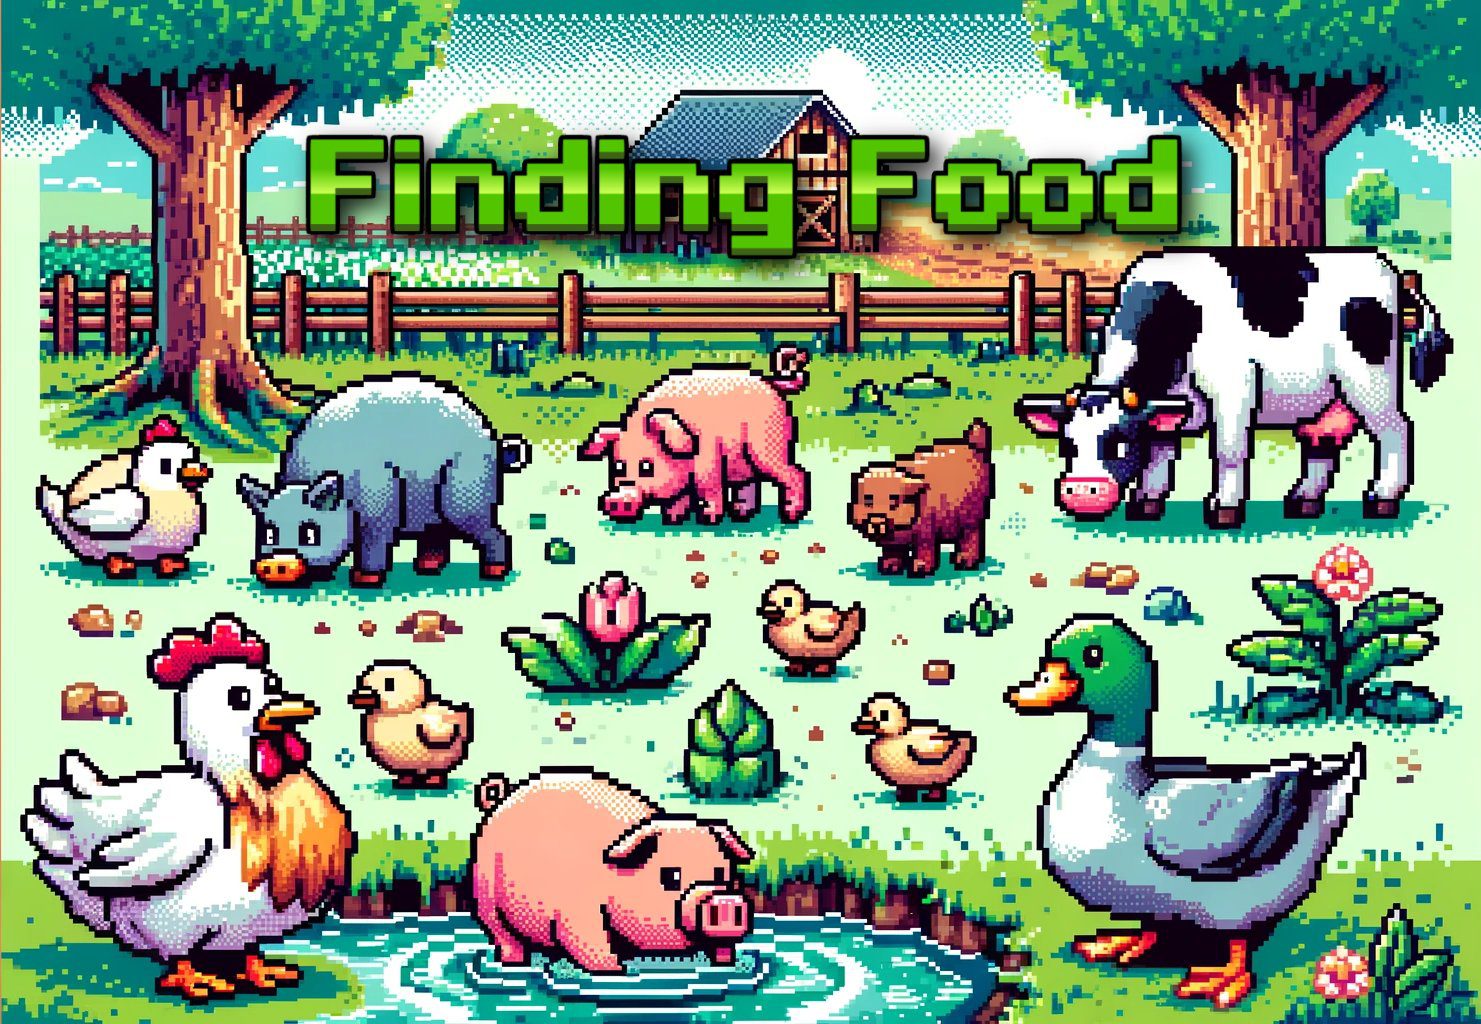 finding food